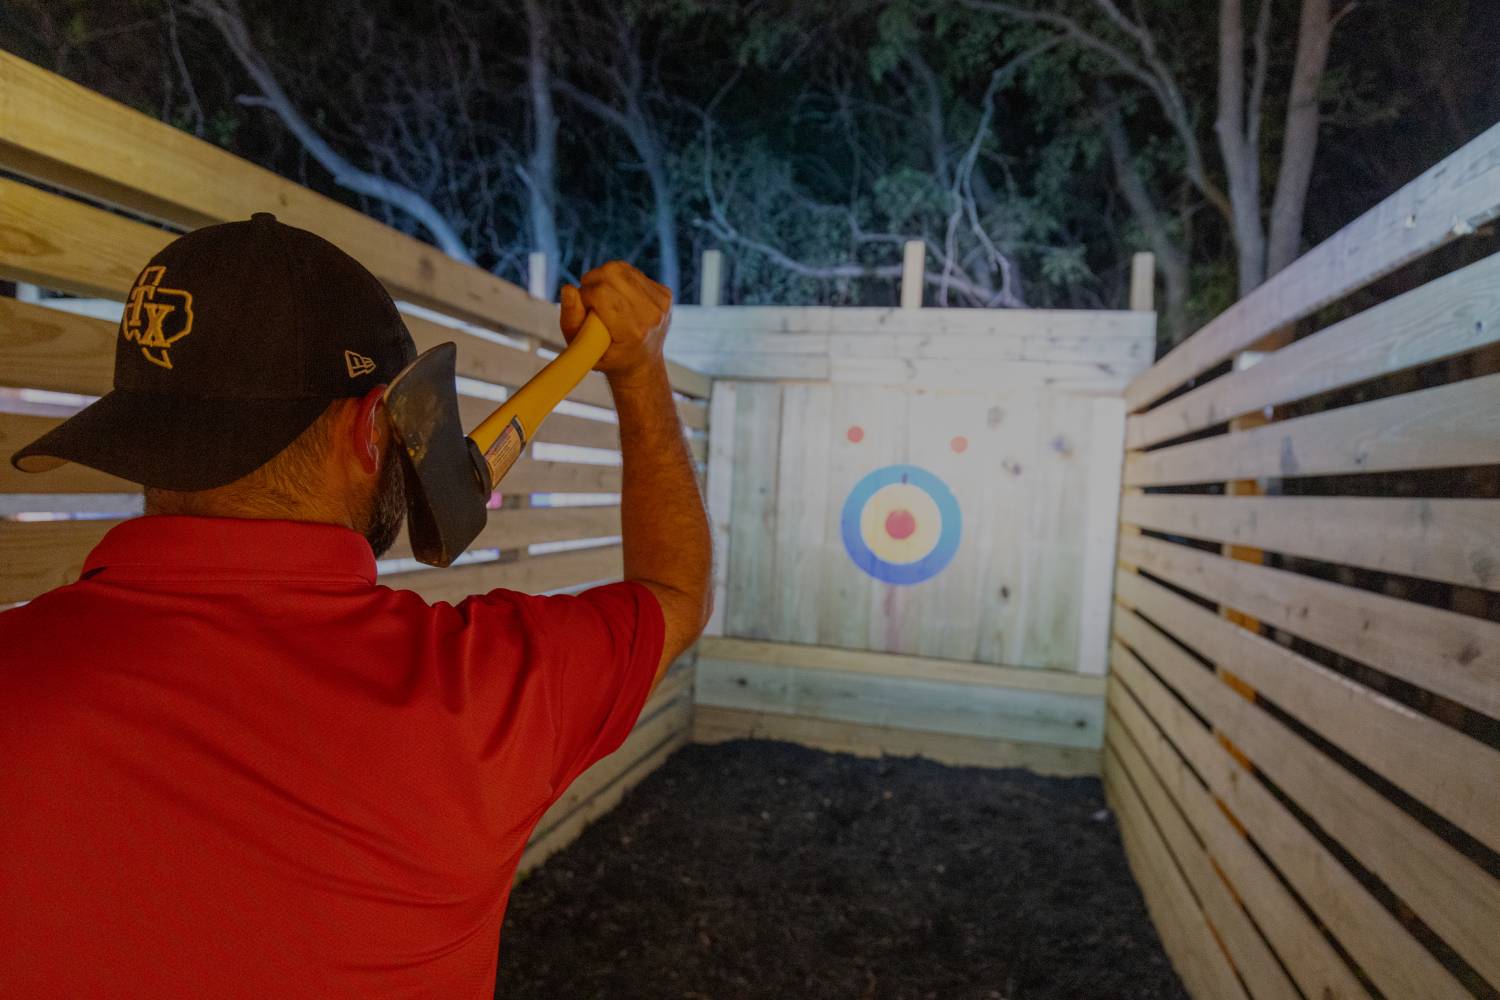 Check out our glow in the dark Clay Pigeon shooting for the dark